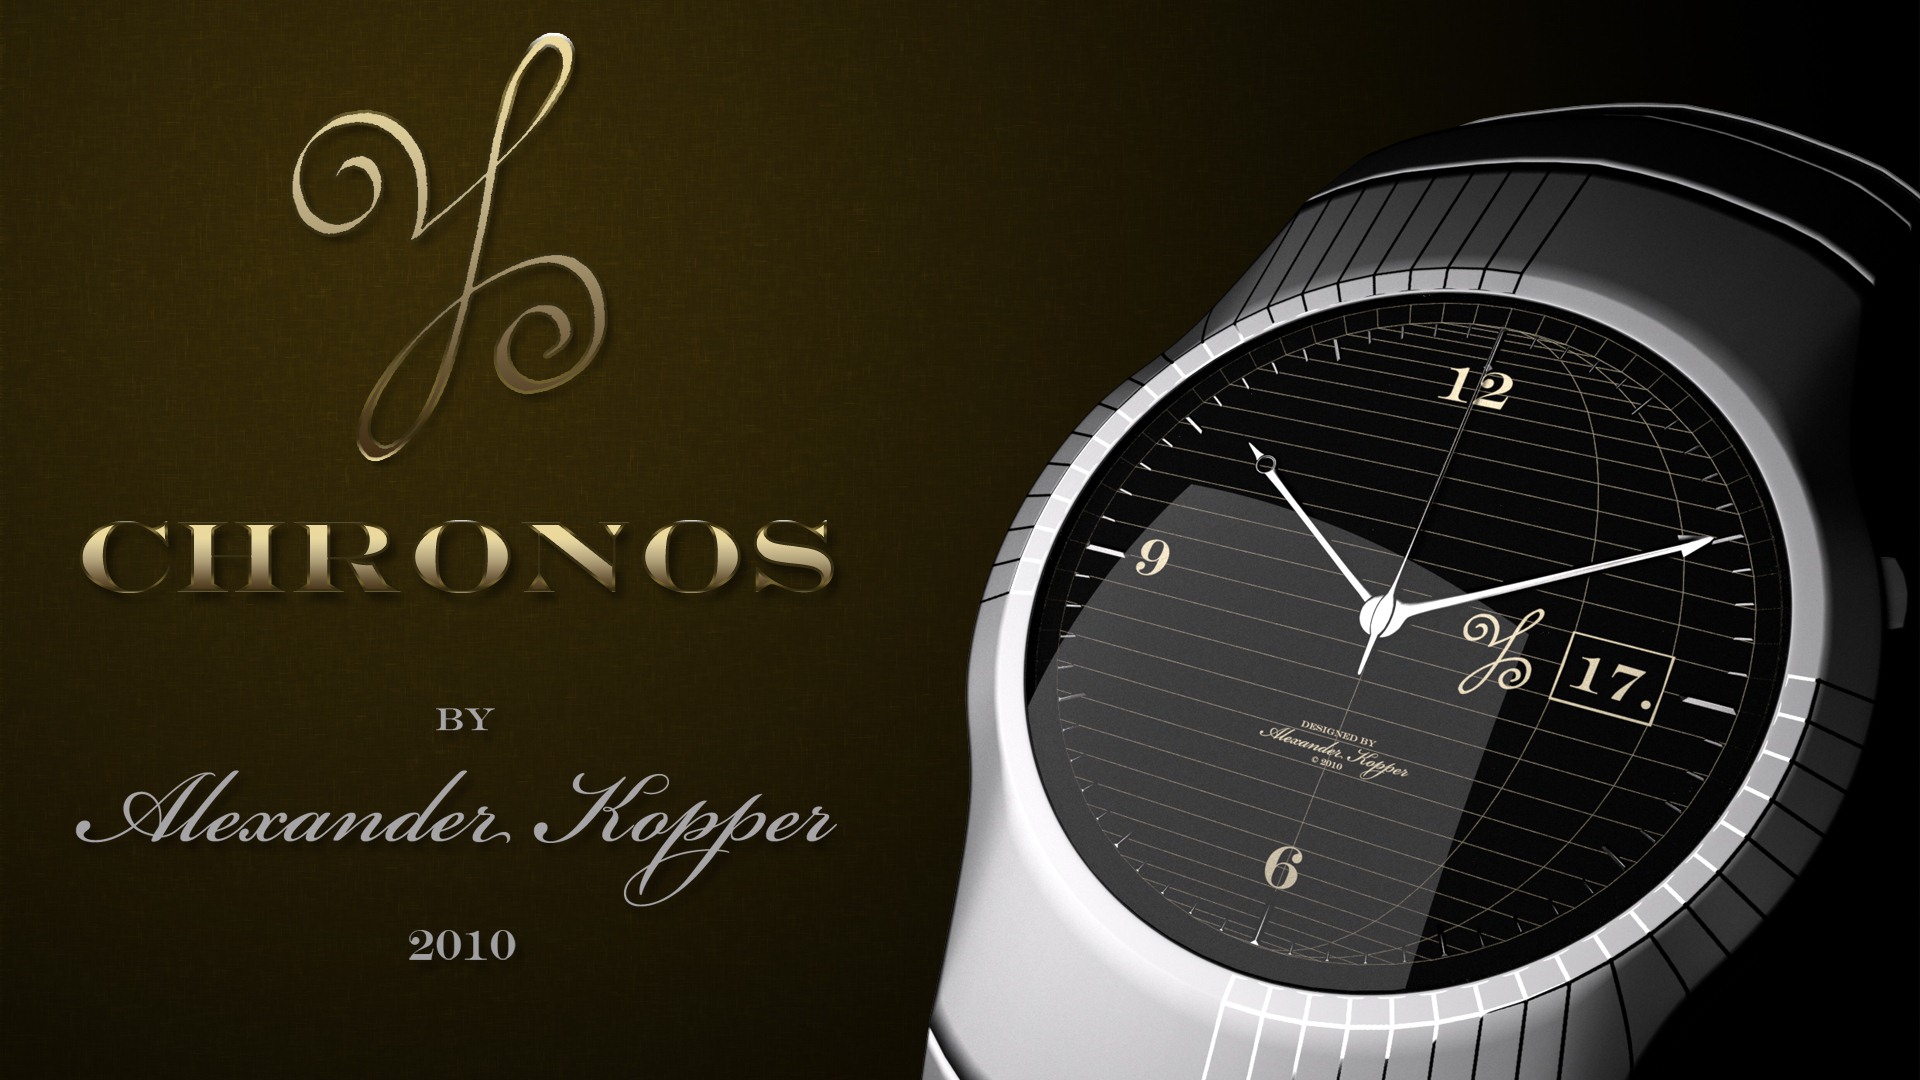 World famous watches wallpapers (1) #18 - 1920x1080